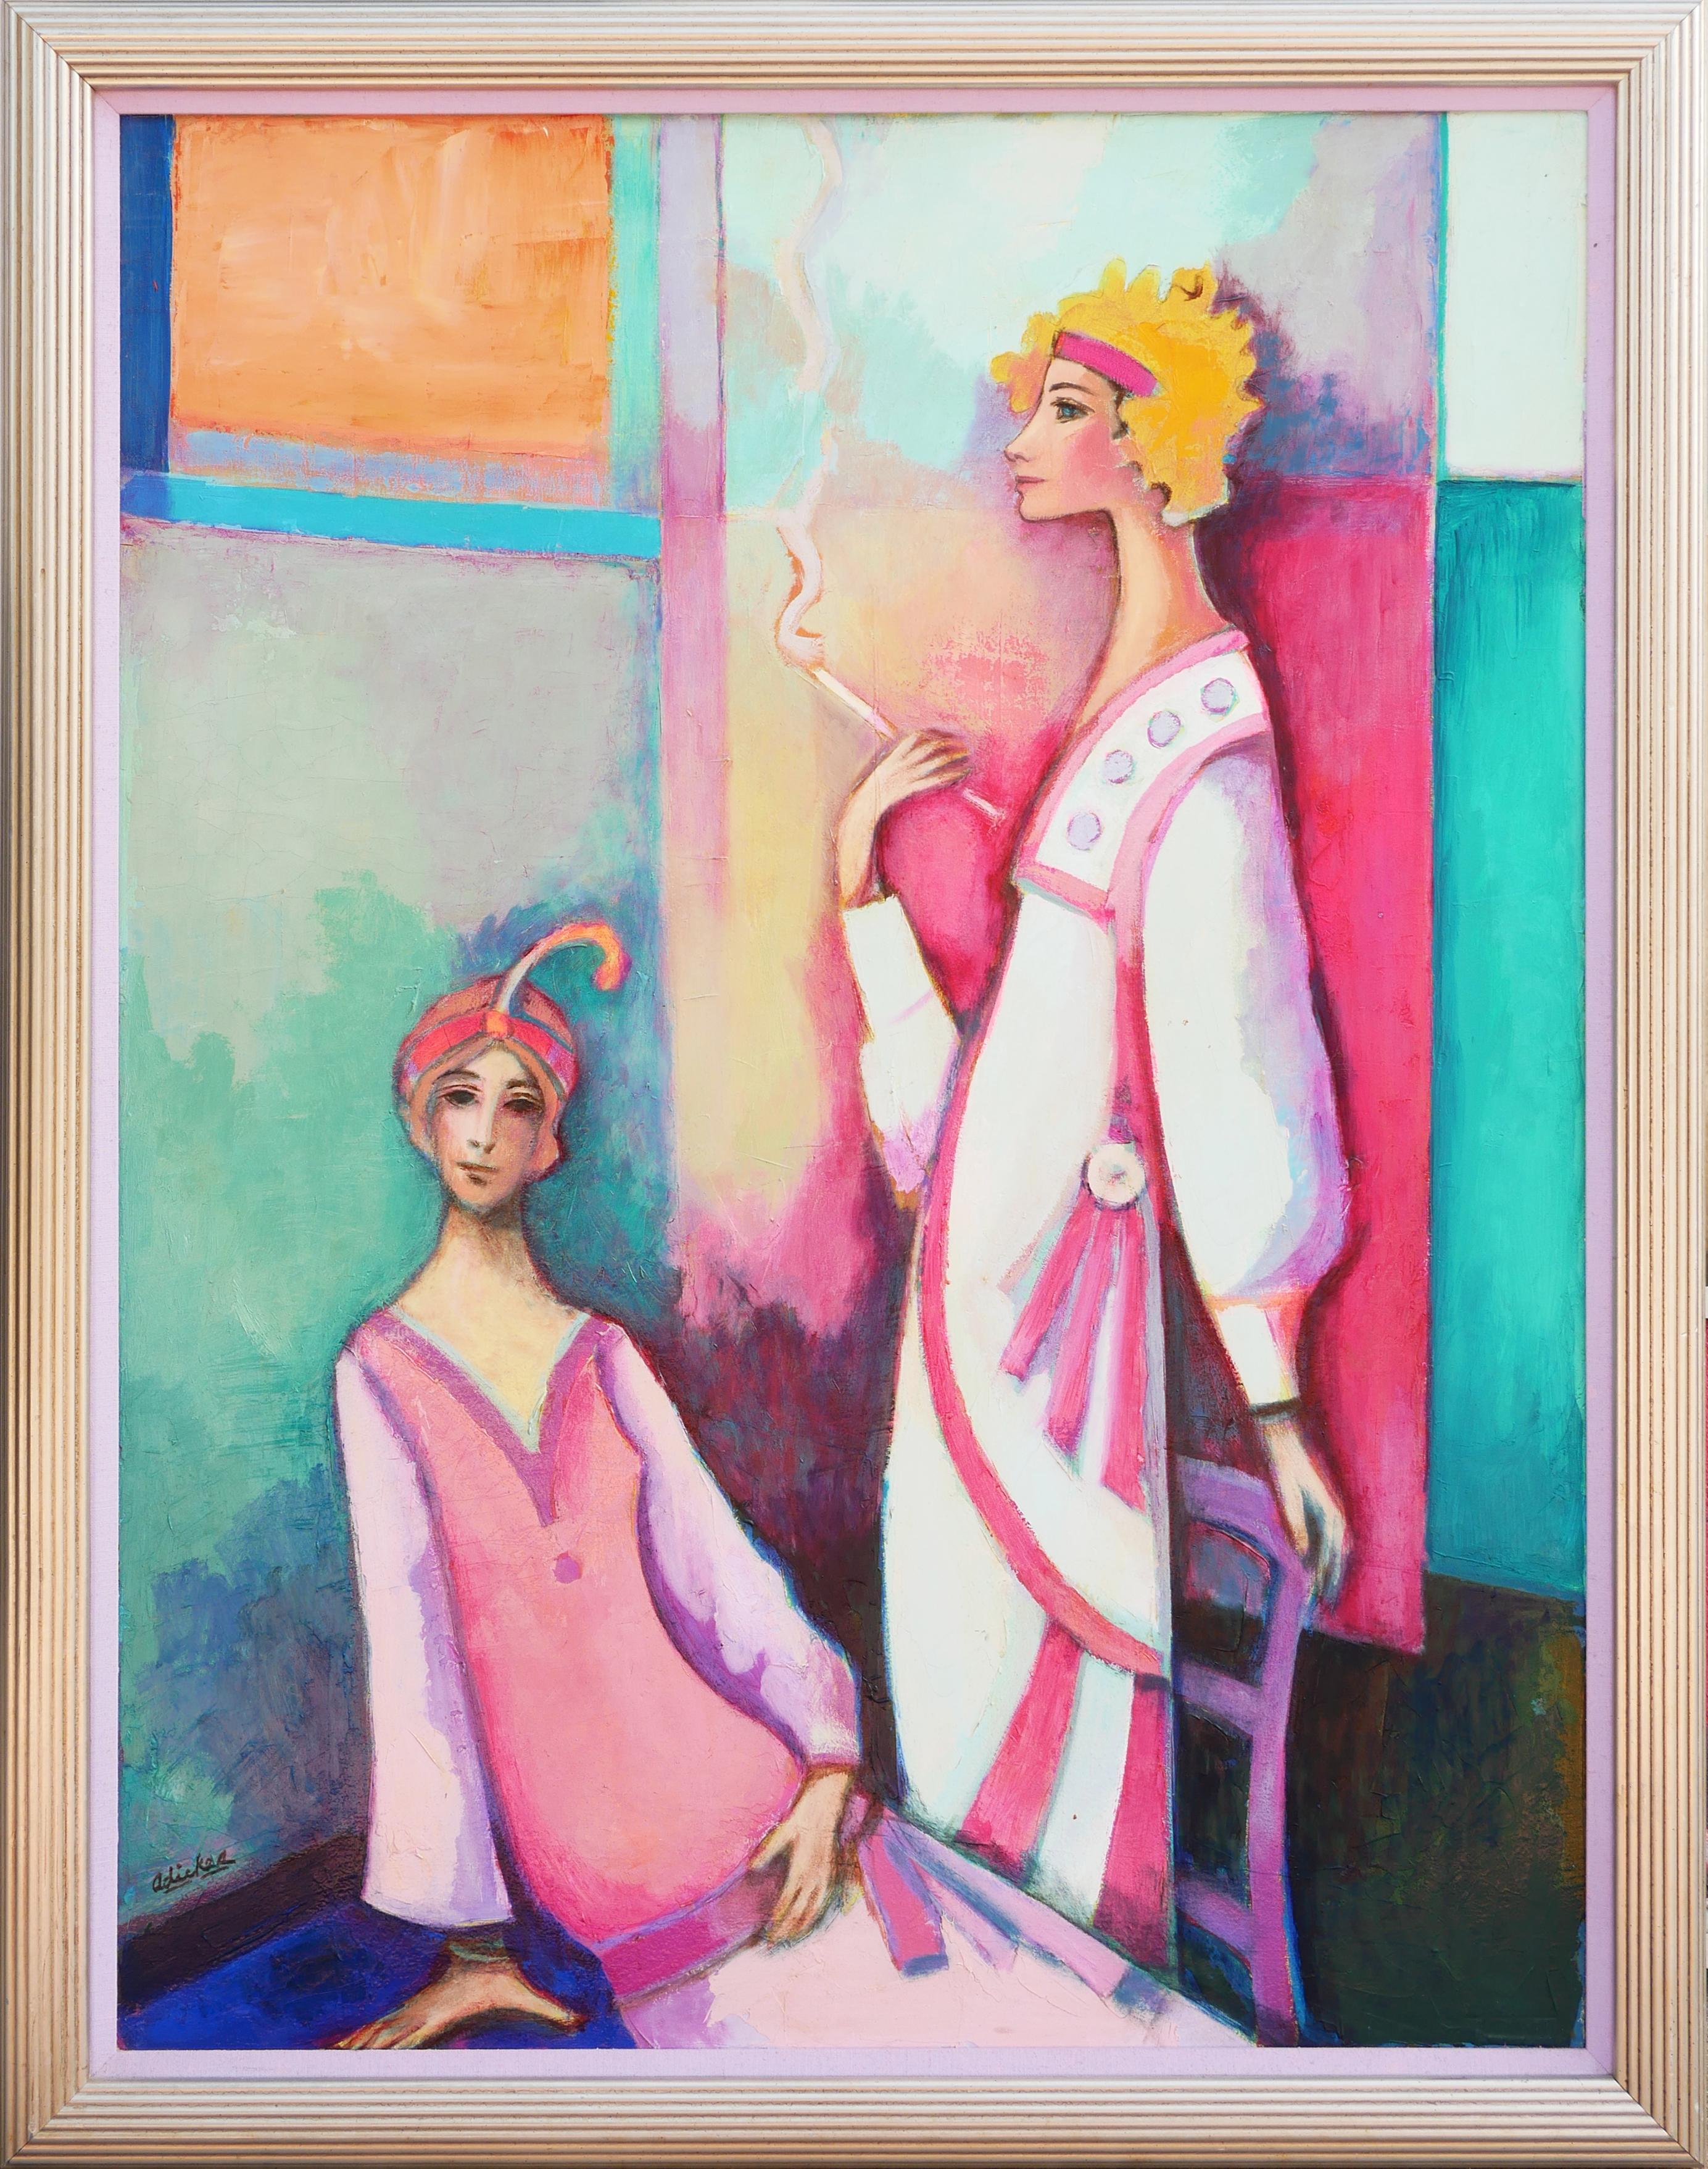 Modern abstract figurative portrait painting by Houston, TX artist David Adickes. The work features a central pair of well dressed female figures in 1920s flapper inspired outfits set against a color blocked background. Signed by the artist in the